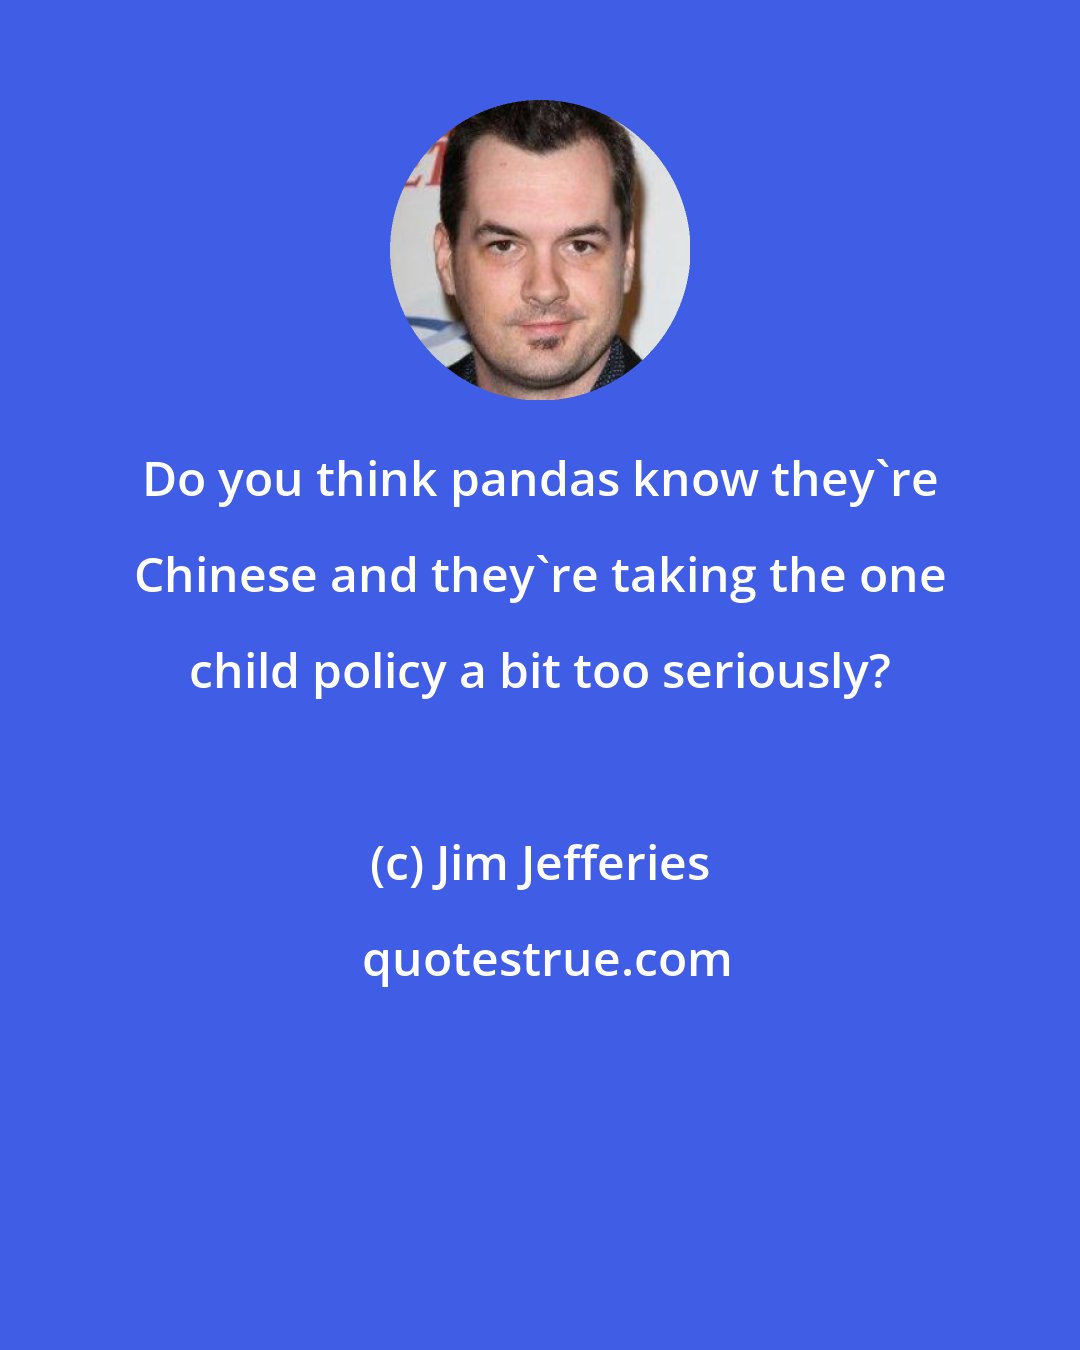 Jim Jefferies: Do you think pandas know they're Chinese and they're taking the one child policy a bit too seriously?